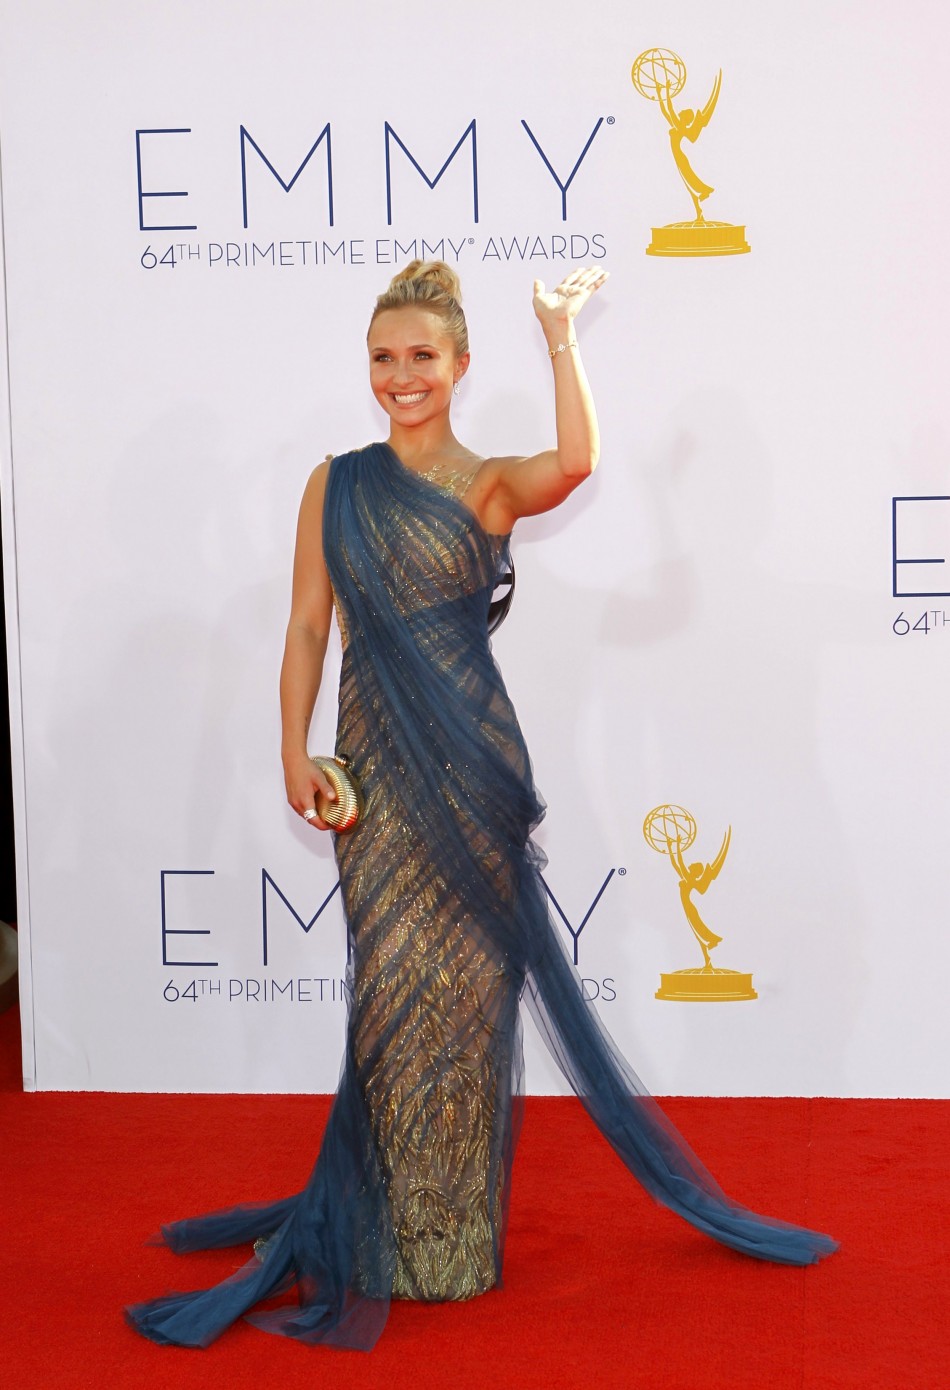 Actress Hayden Panettiere arrives at the 64th Primetime Emmy Awards in Los Angeles